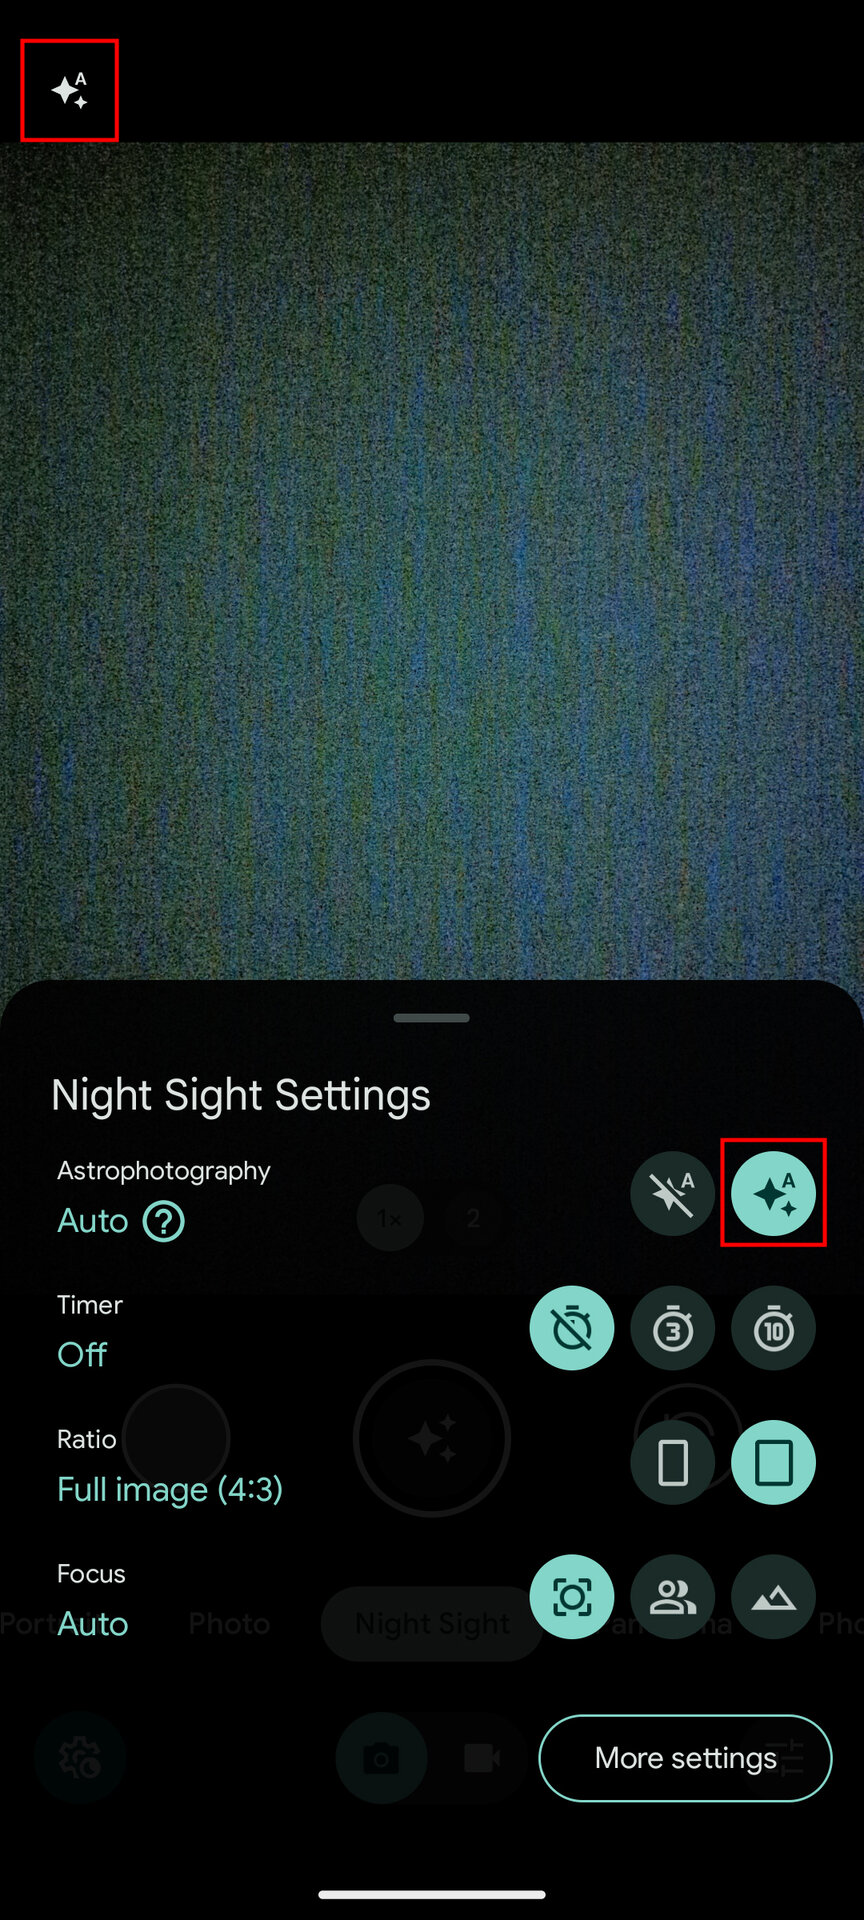 How to enable Astrophotography mode (2)